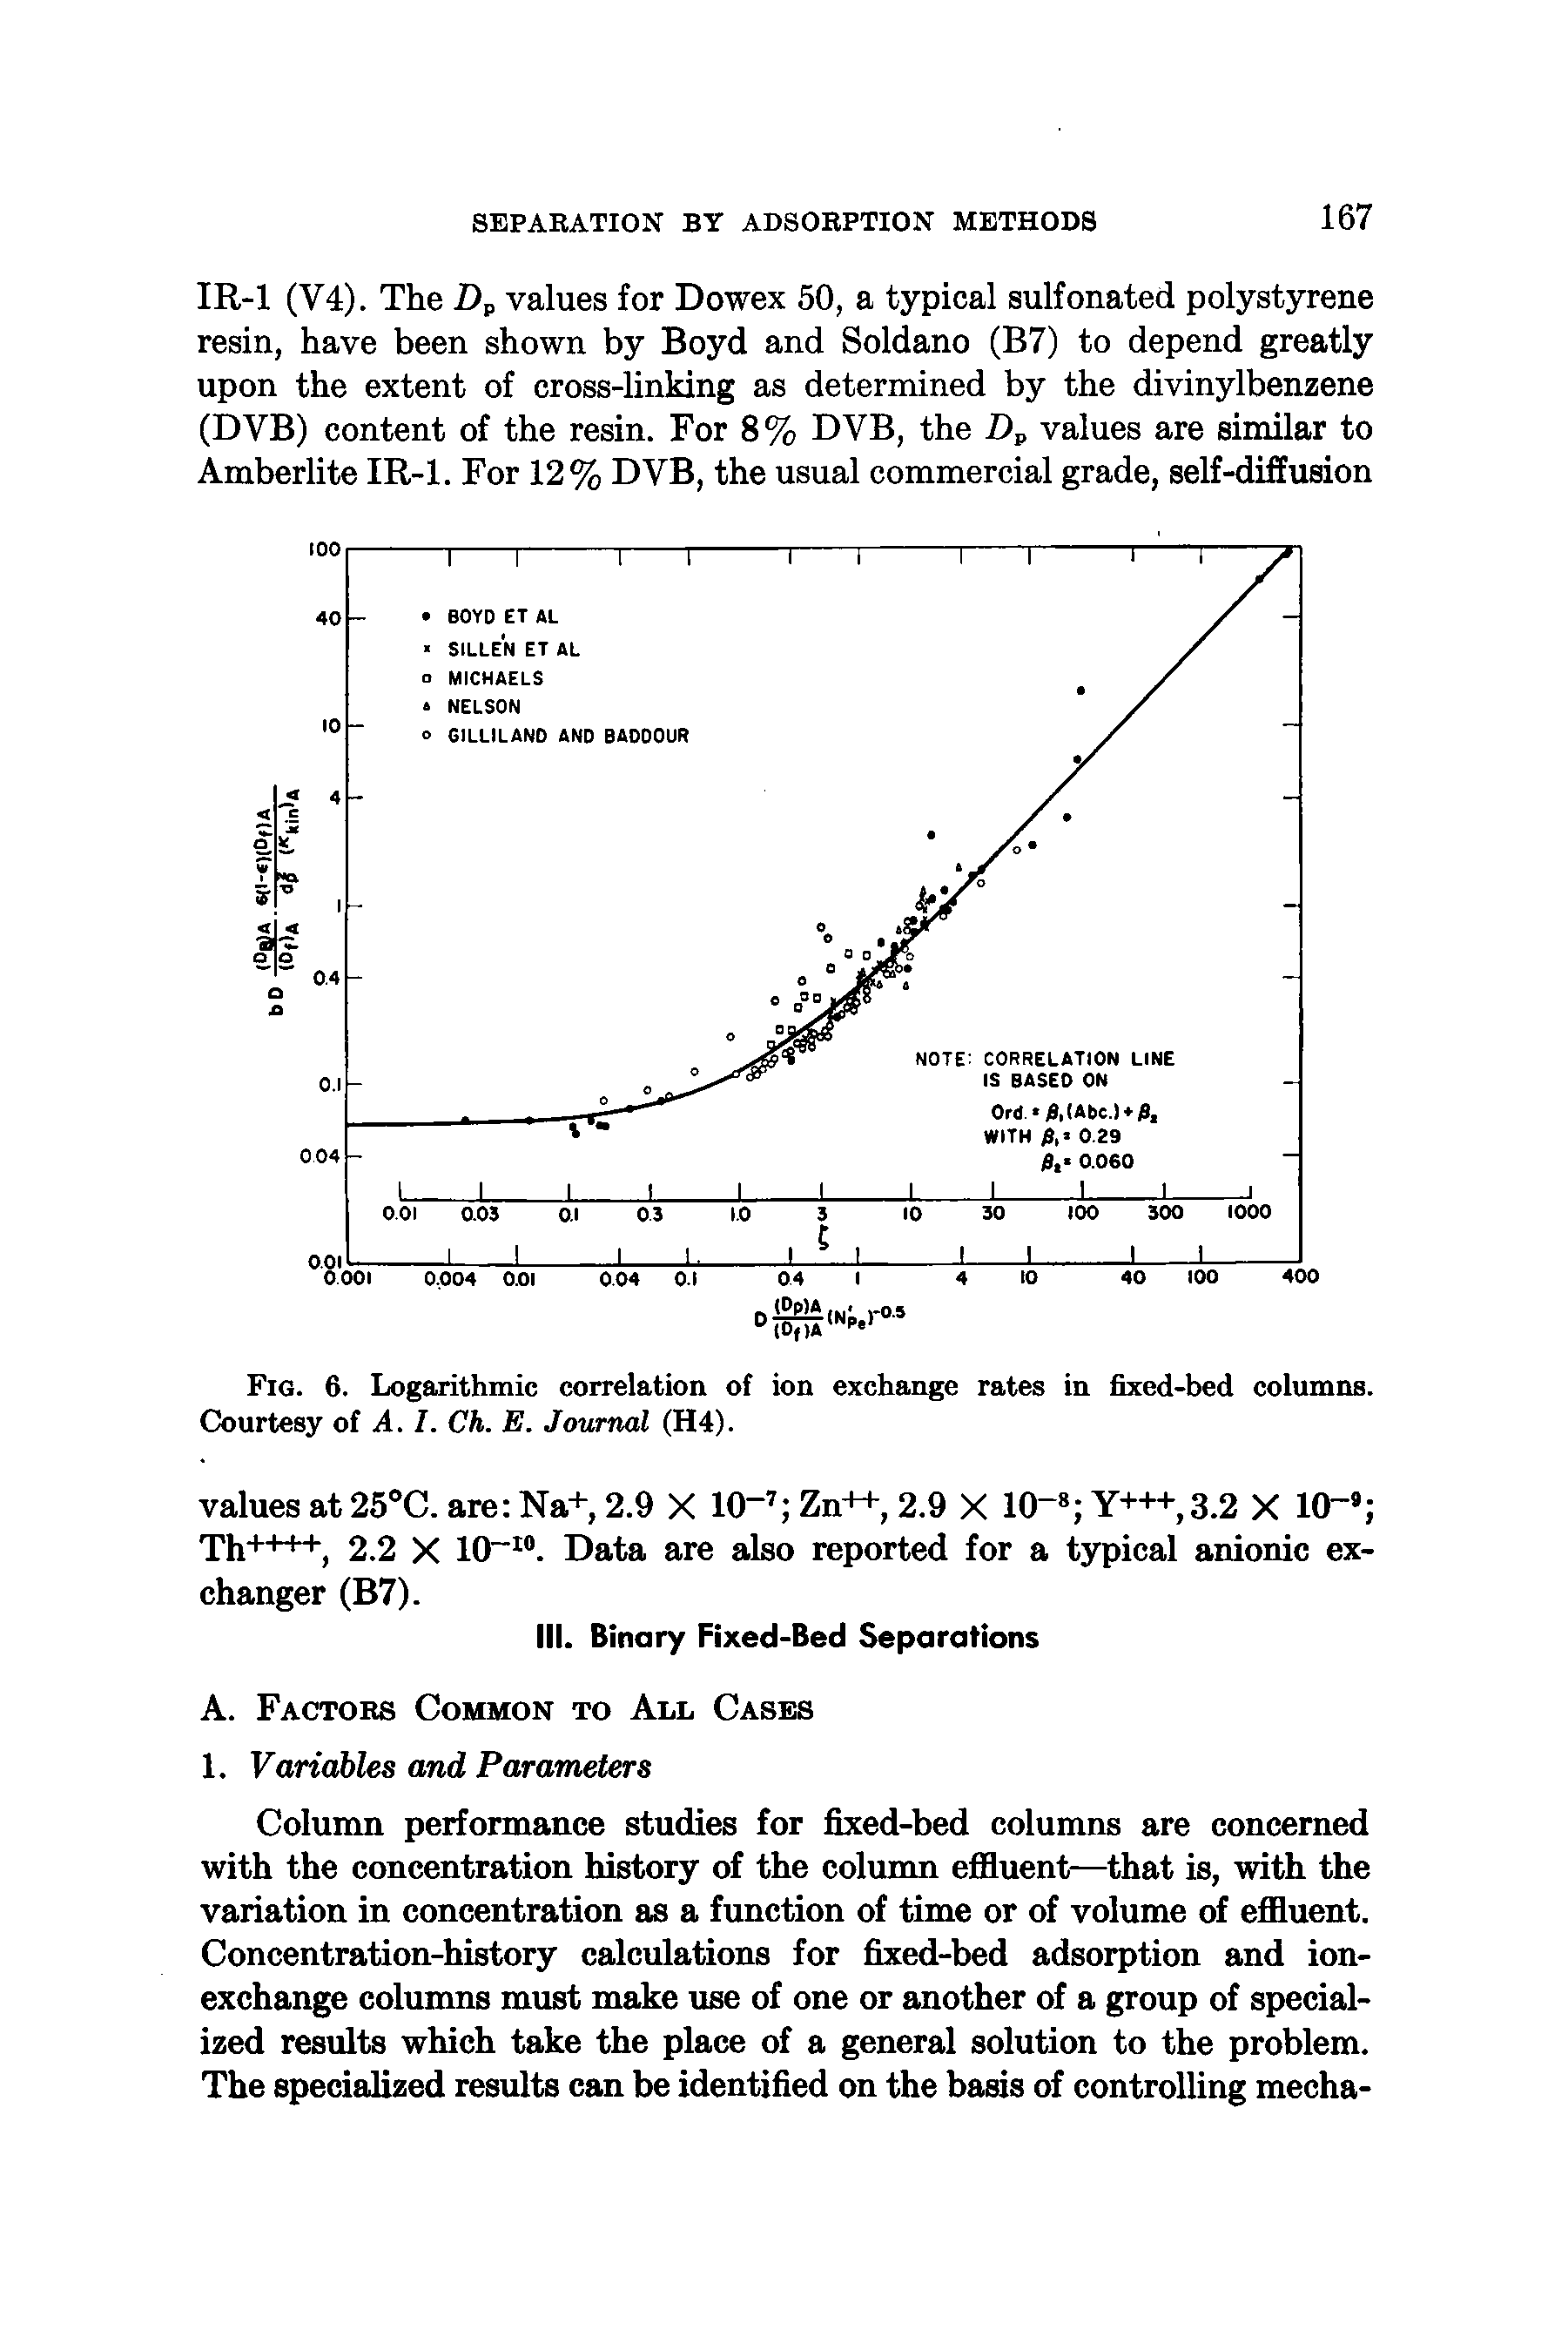 Fig. 6. Logarithmic correlation of ion exchange rates in fixed-bed columns. Courtesy of A. I. Ch. E. Journal (H4).